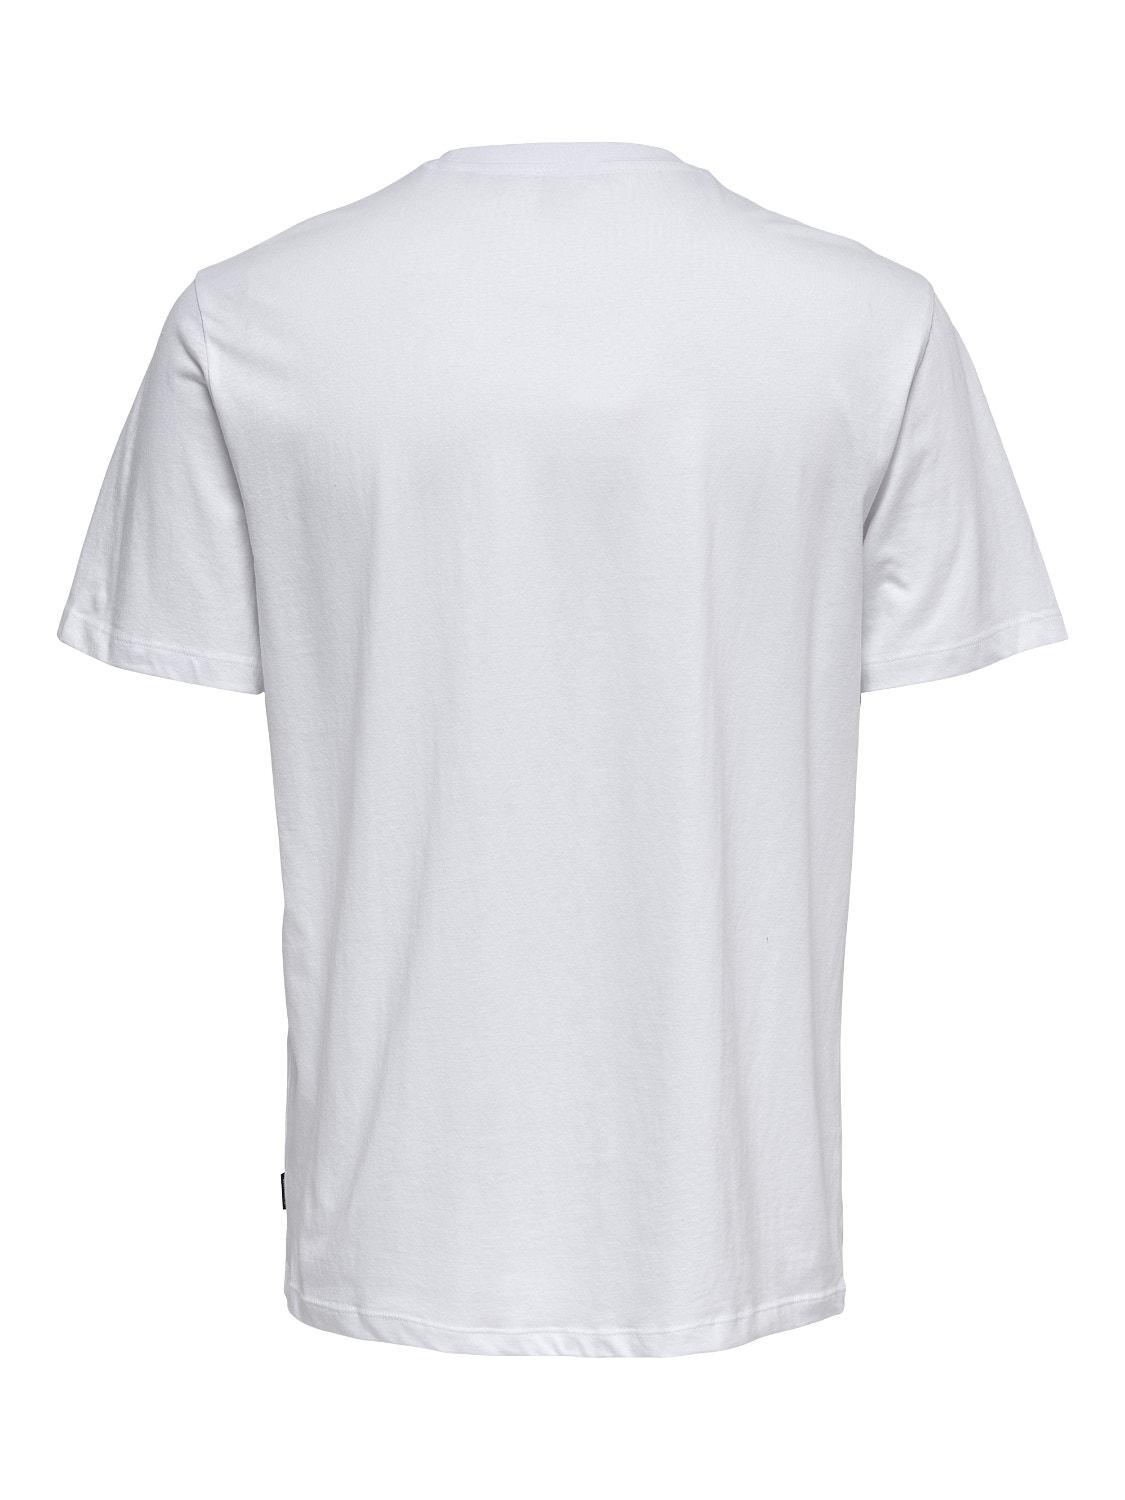 ONLY & SONS Regular Fit O-hals T-skjorte -Bright White - 22022196